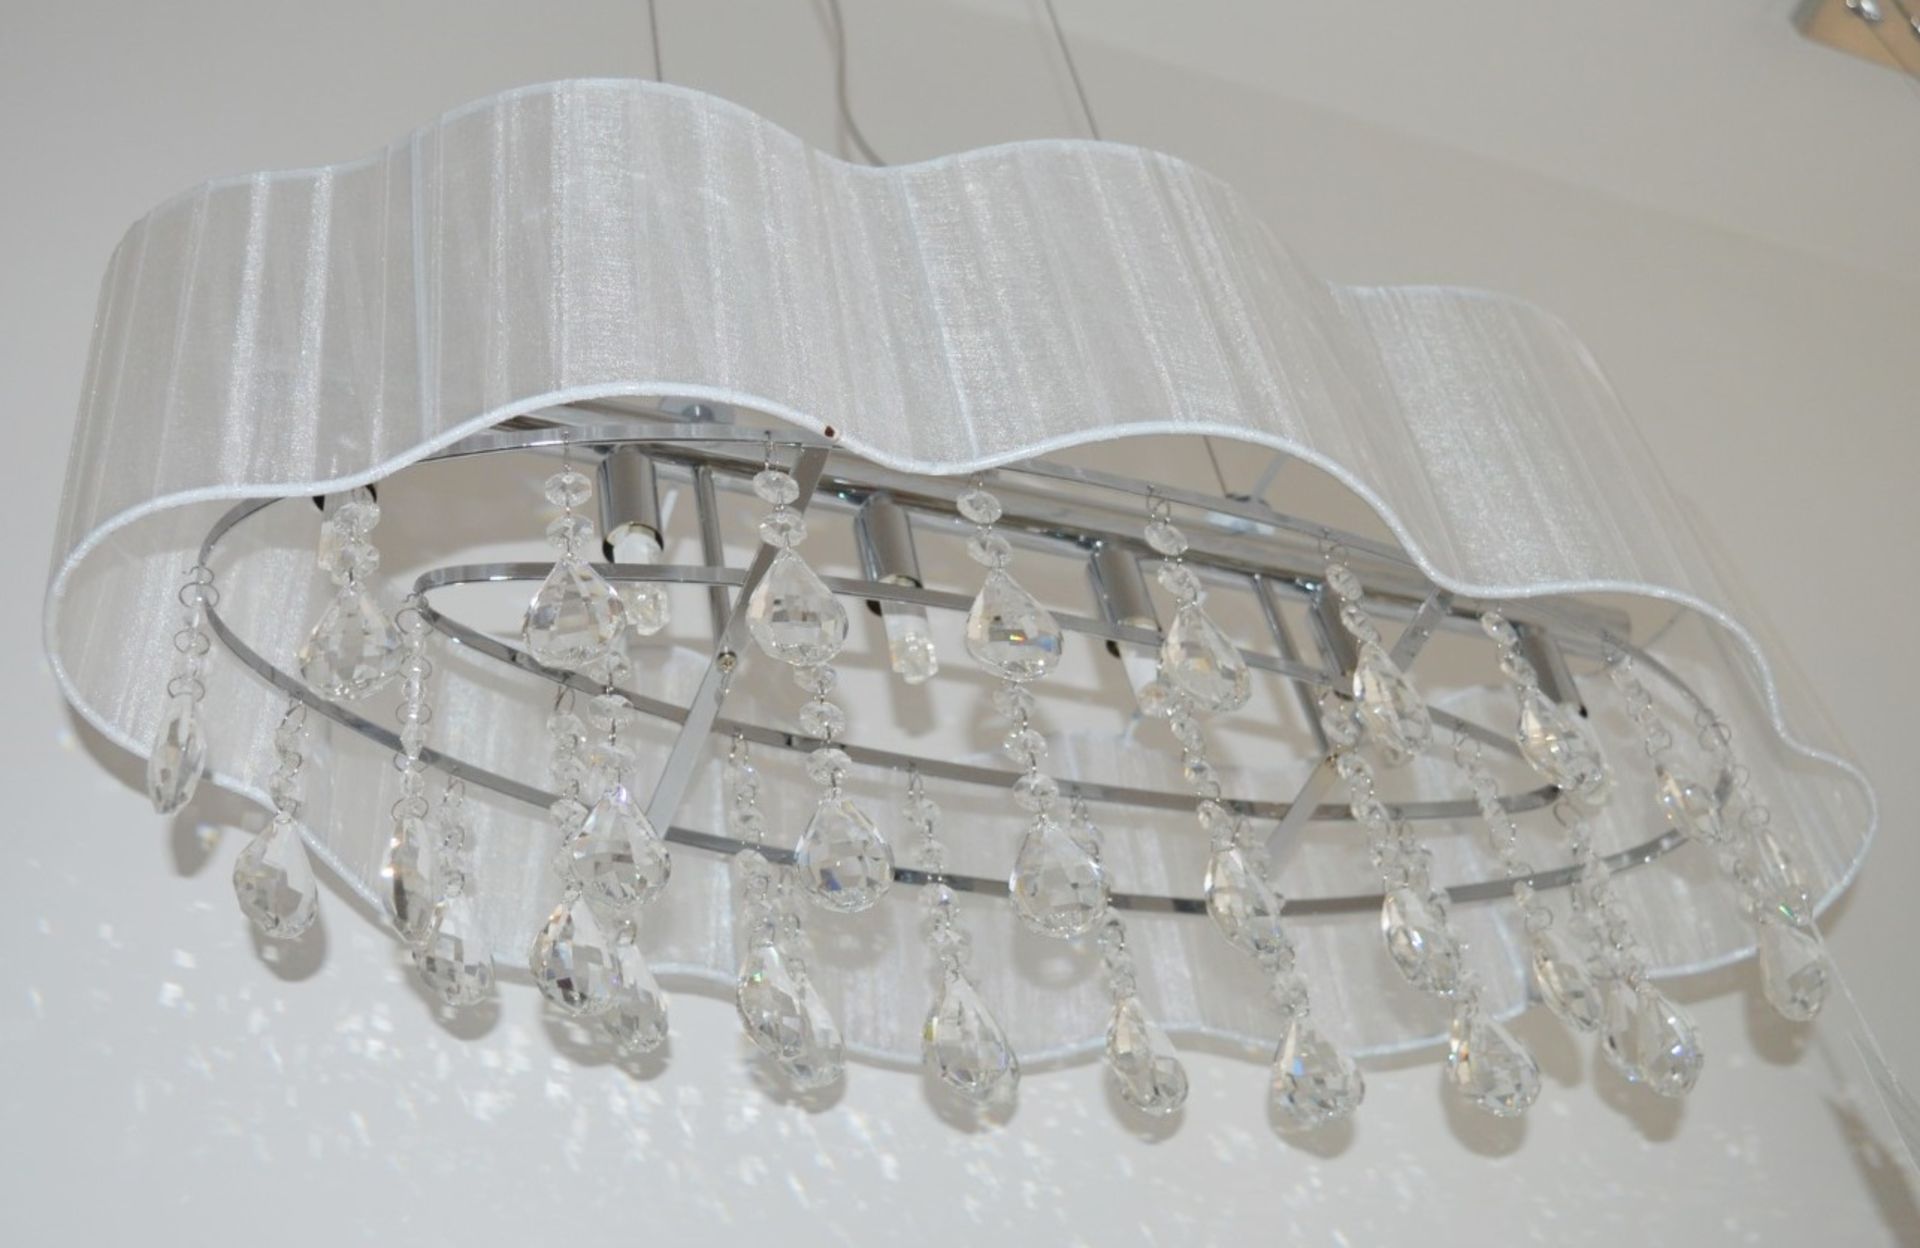 1 x Large Pleated 6-Light Ceiling Light With A Cream Voile Shade - RRP £220.00 - Image 2 of 3